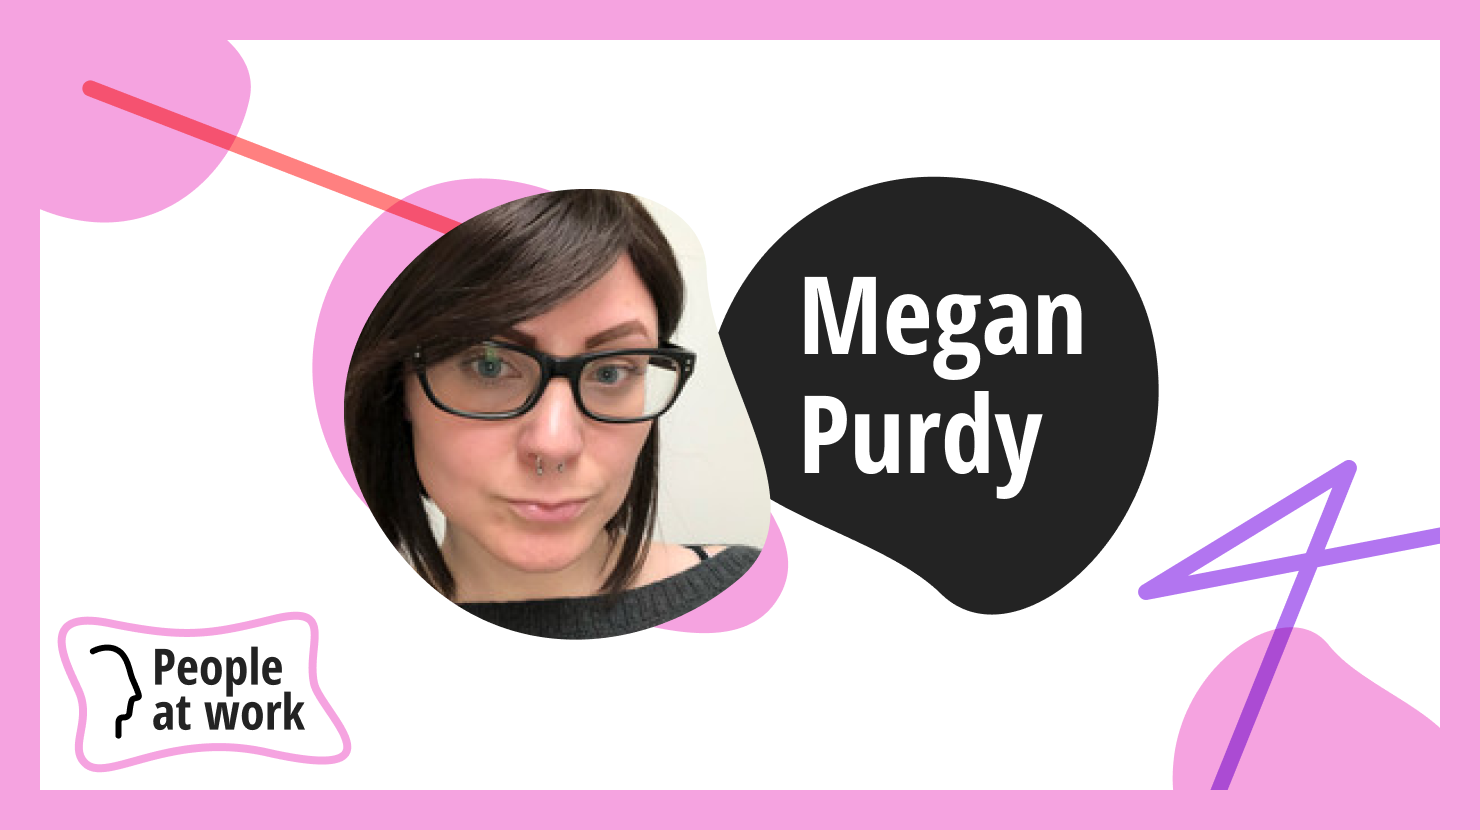 Give employees room to breathe with Megan Purdy